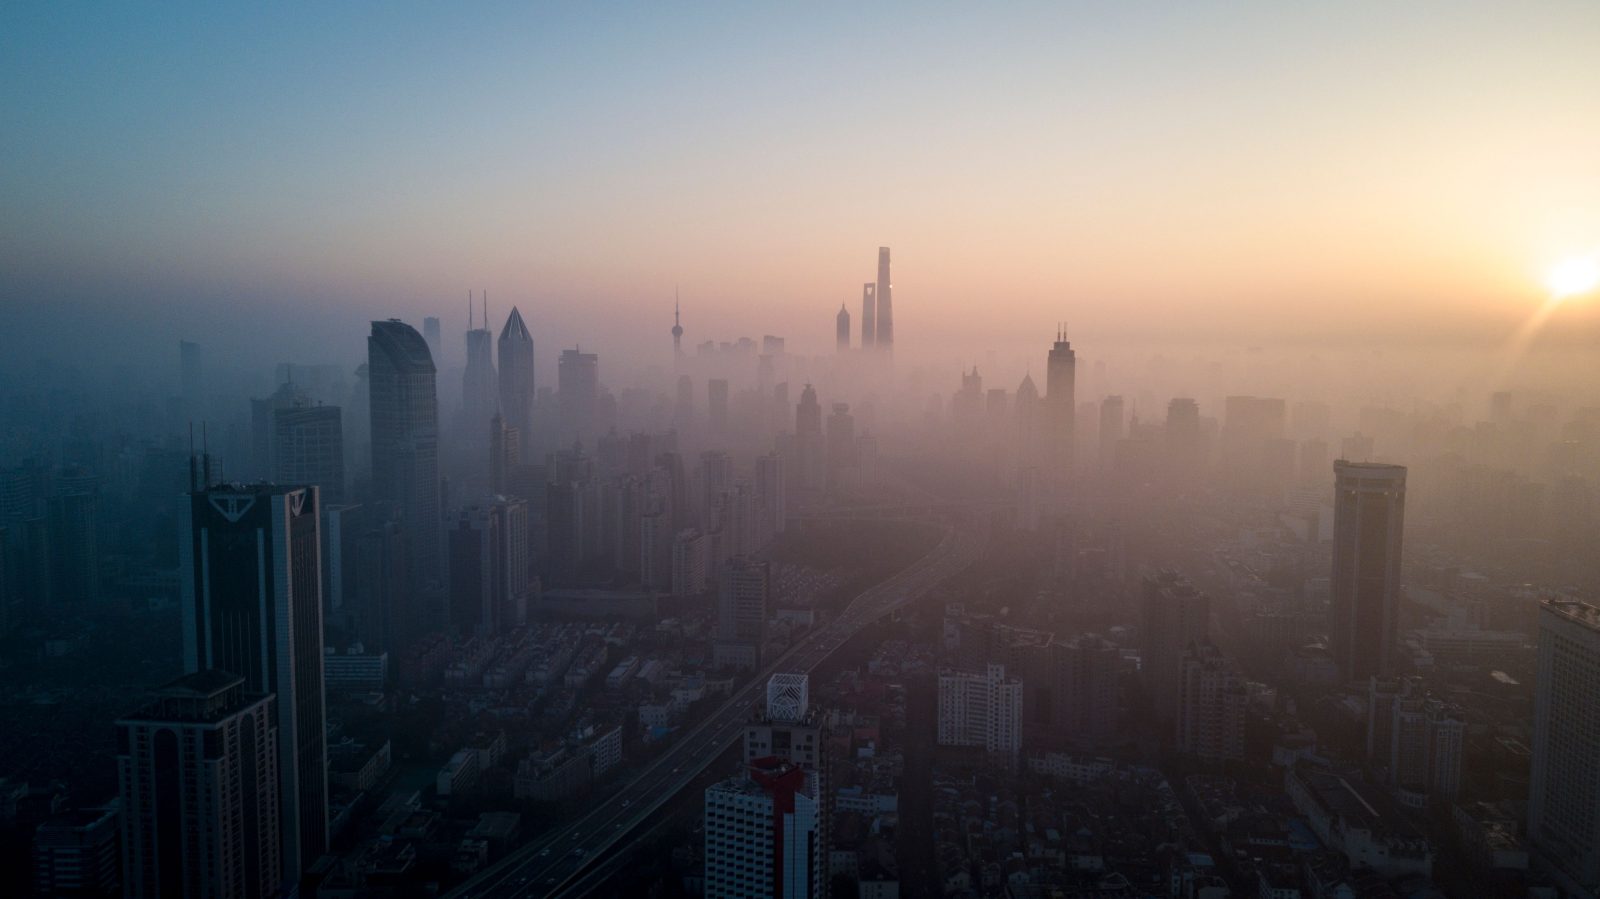 The sun rising above the skyline of a highly polluted Shanghai.